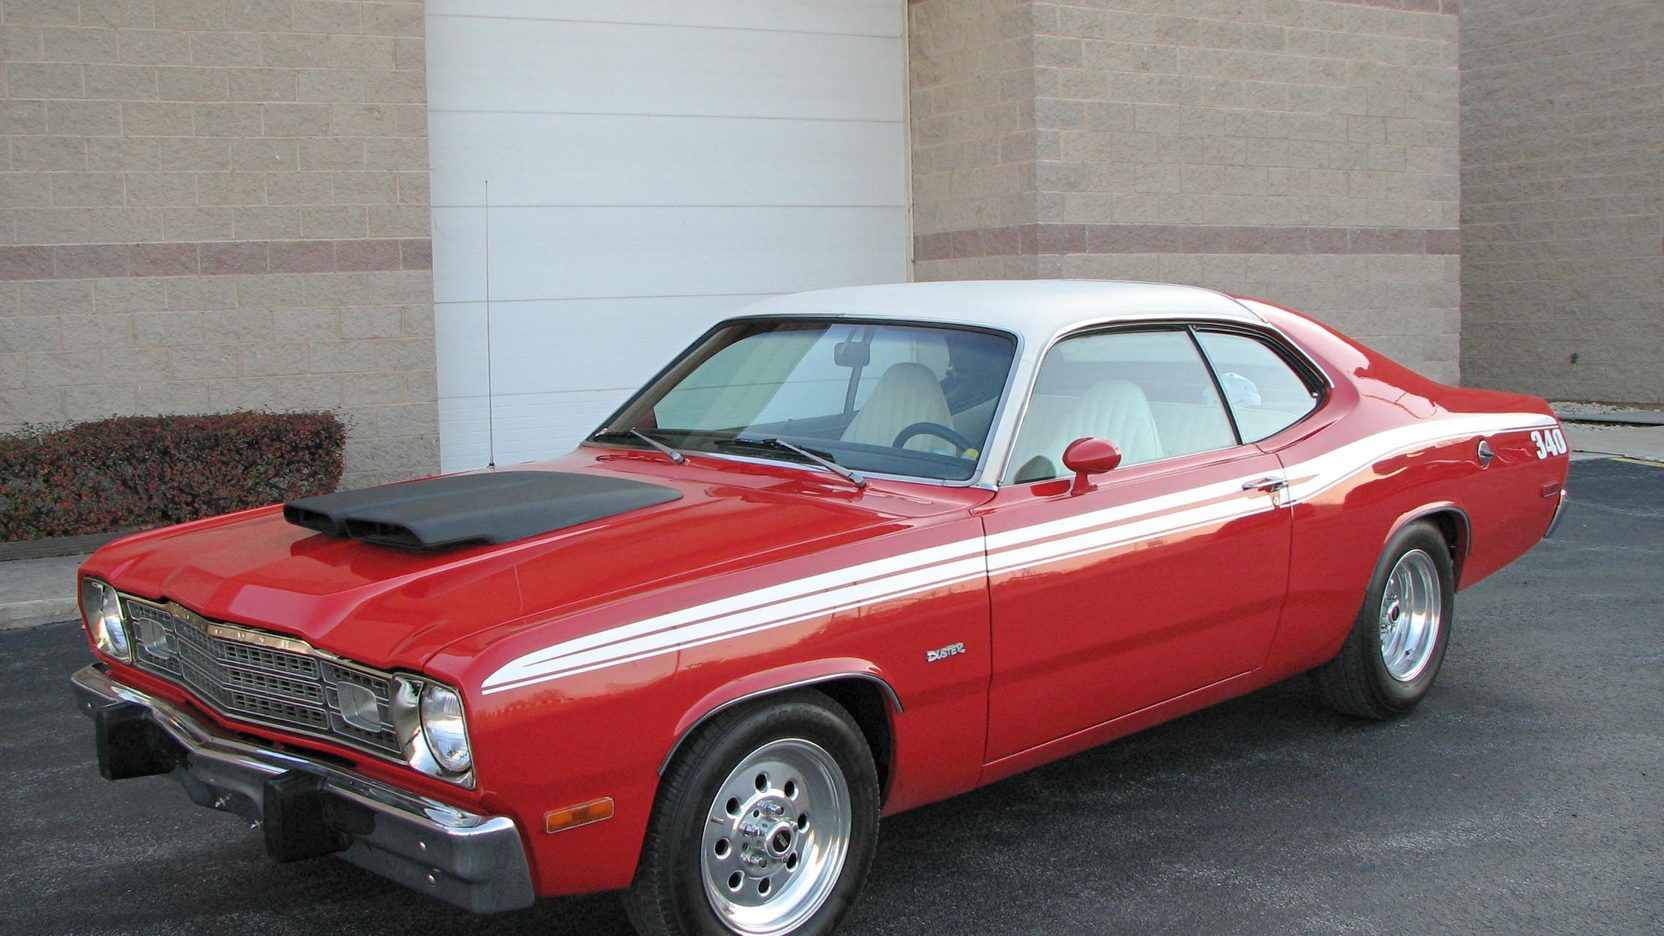 A parked 1973 Plymouth Duster 340